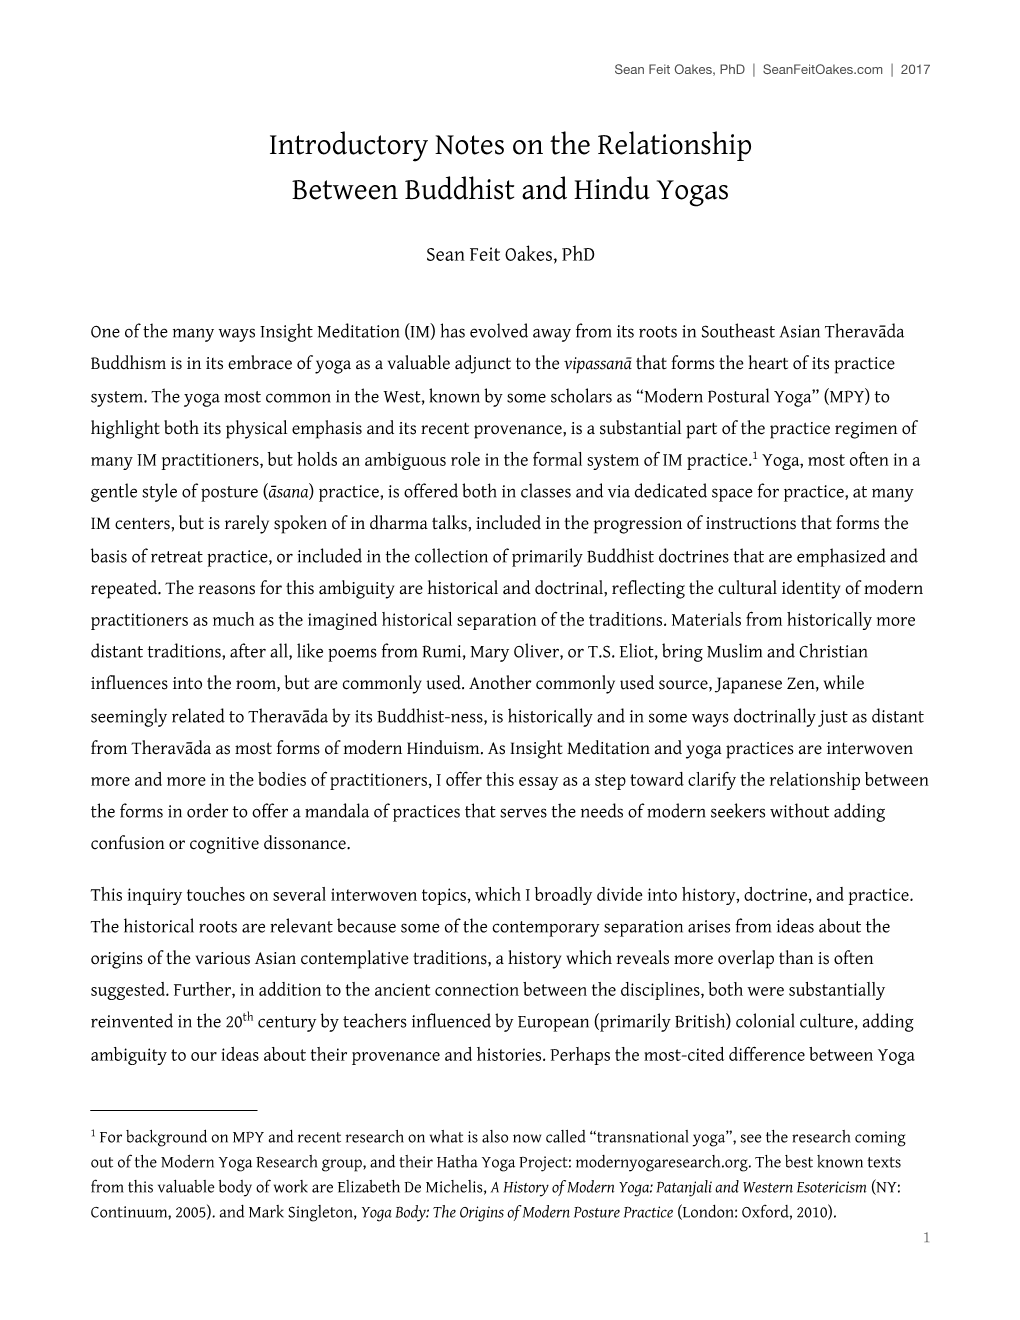 Introductory Notes on the Relationship Between Buddhist and Hindu Yogas